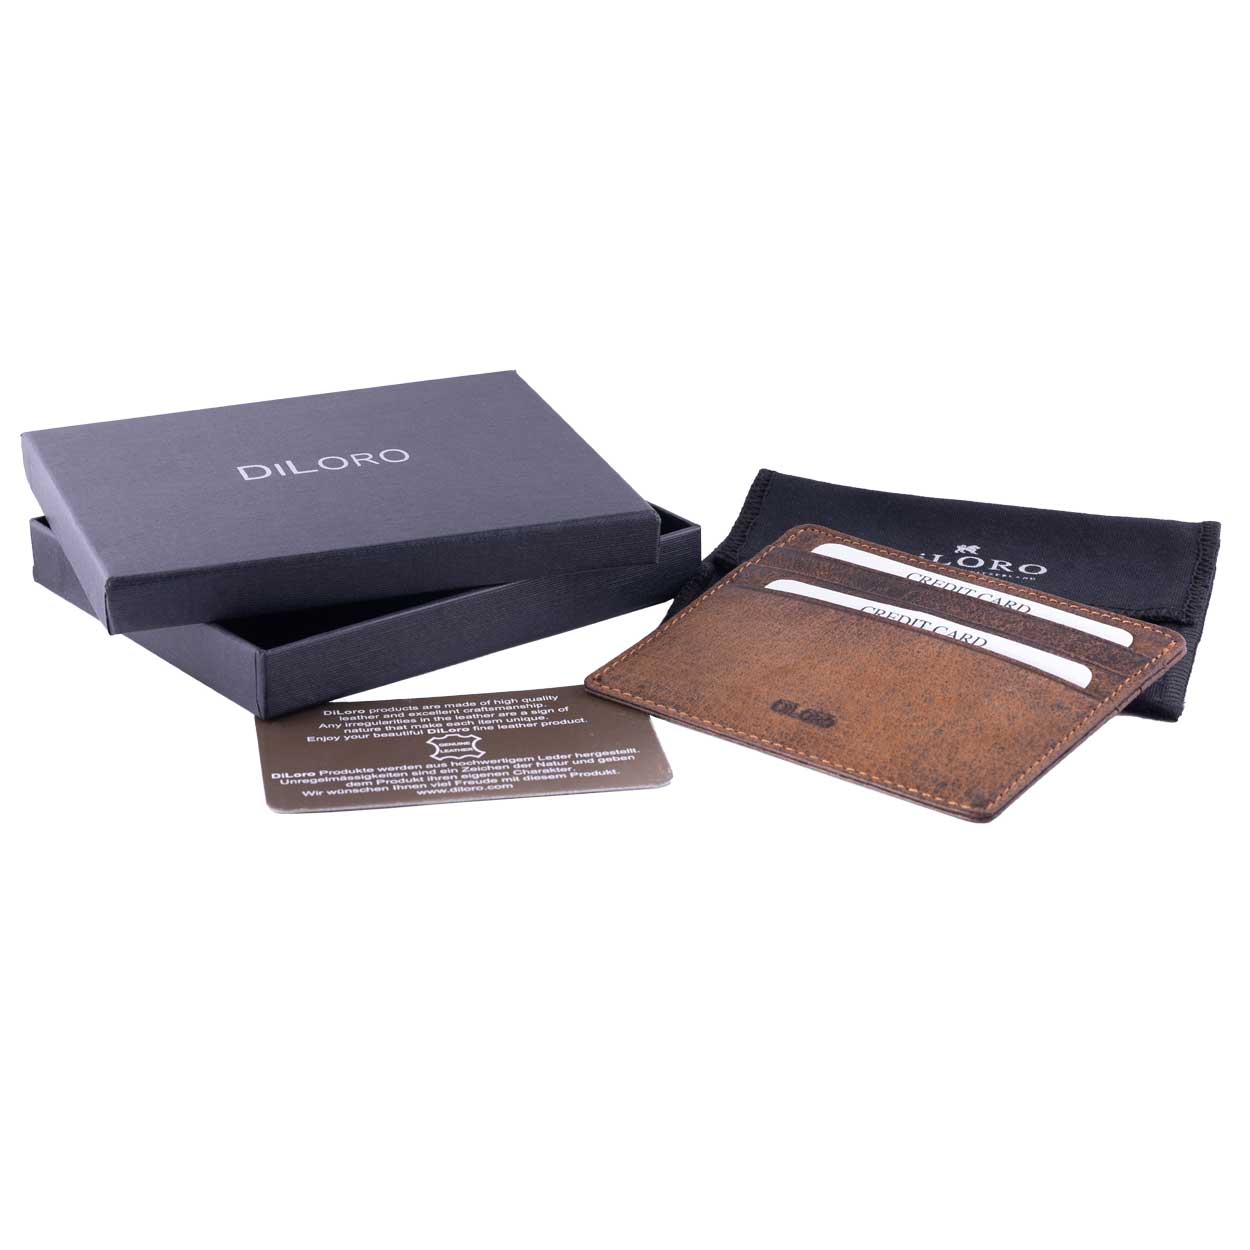 Dark Hunter Brown  DiLoro Buffalo  Leather Ultra Slim RFID Blocking Minimalist Travel Card Wallet ships in our beautiful DiLoro gift box and with dust bag